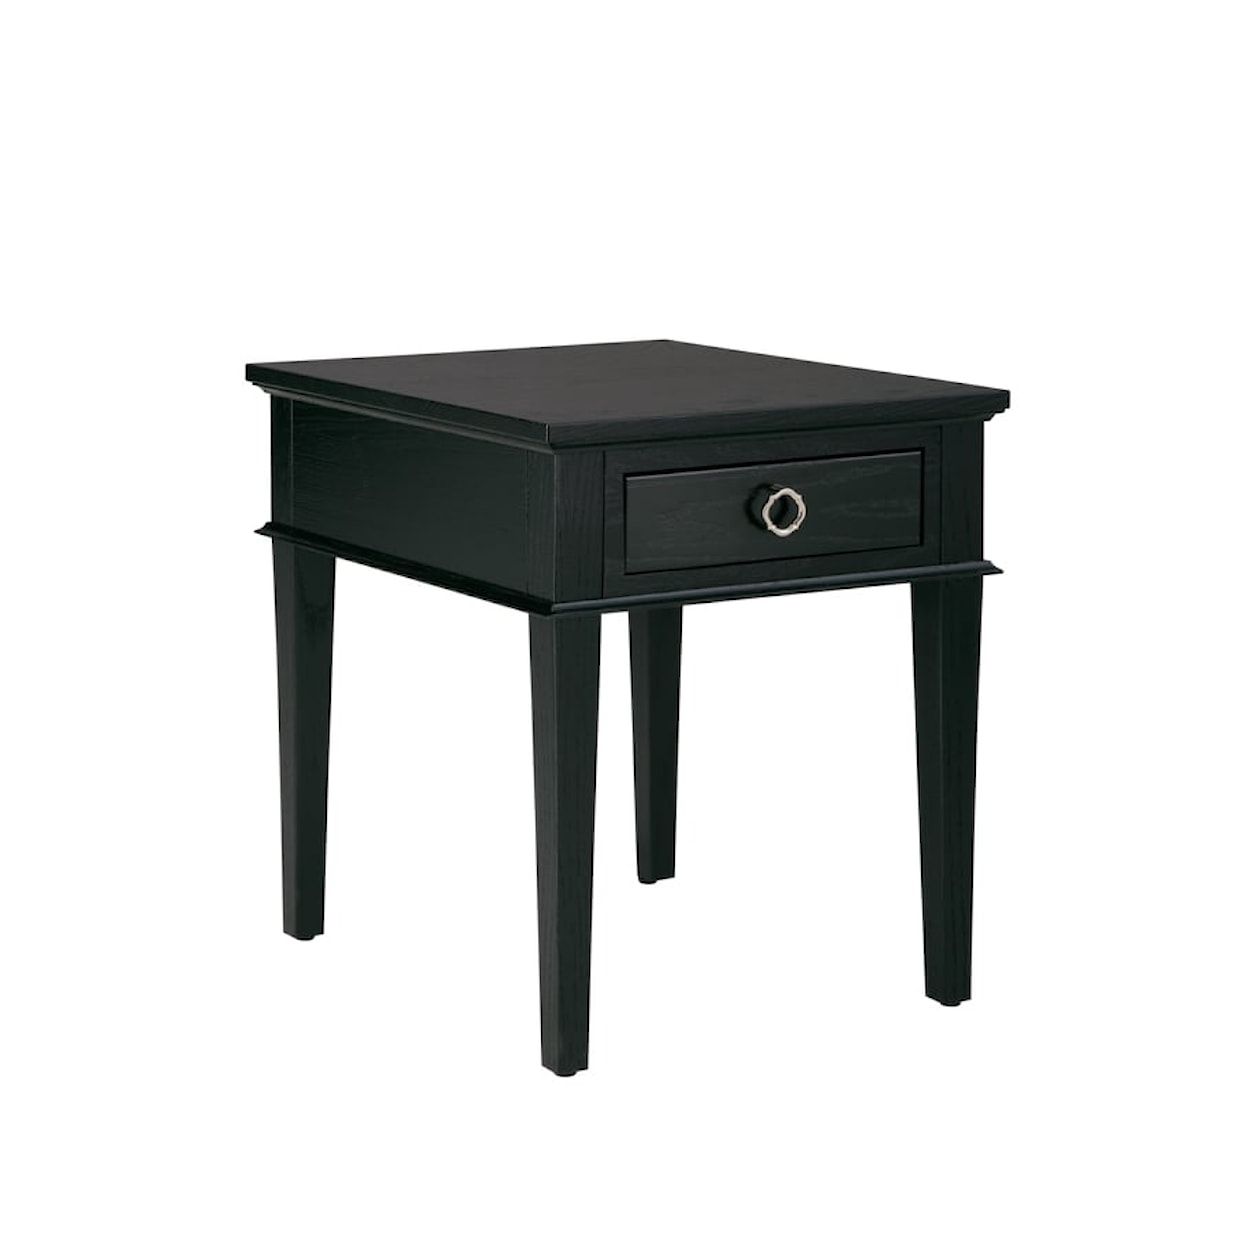 Mavin South Port Occasional Customizable South Port End Table